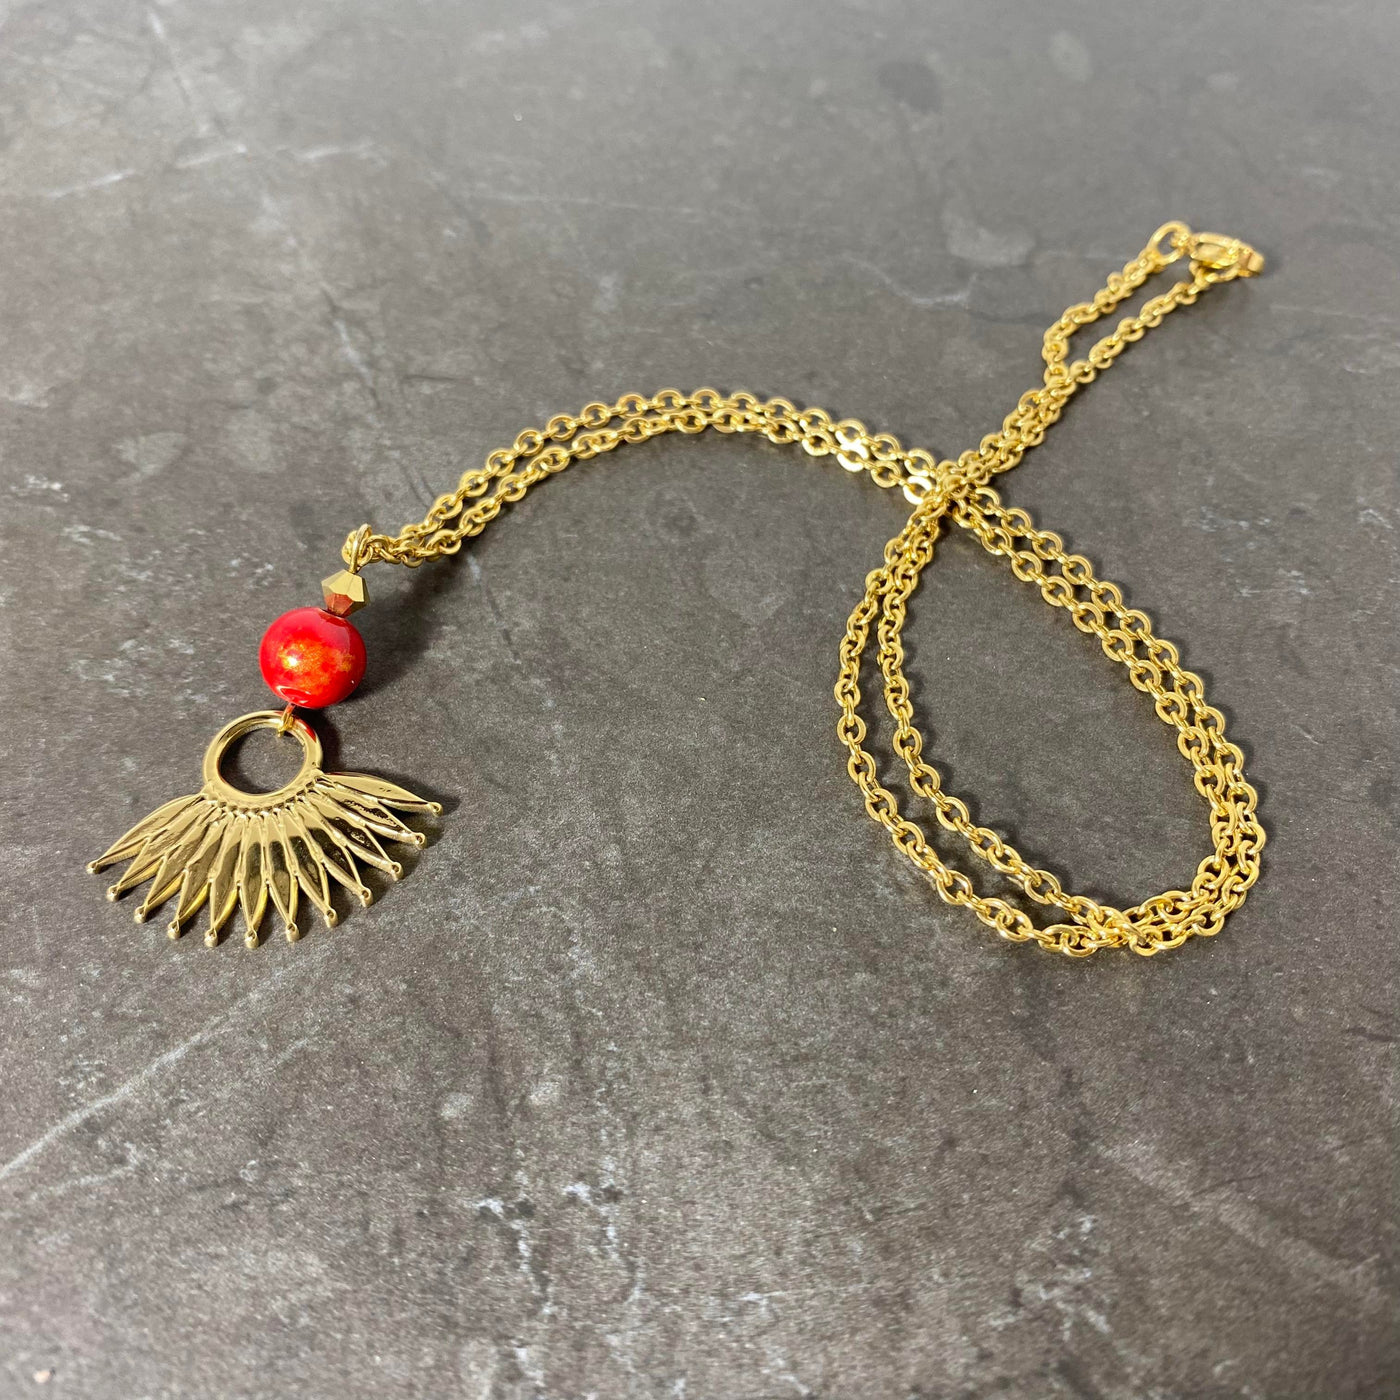 Red or green Panka necklace